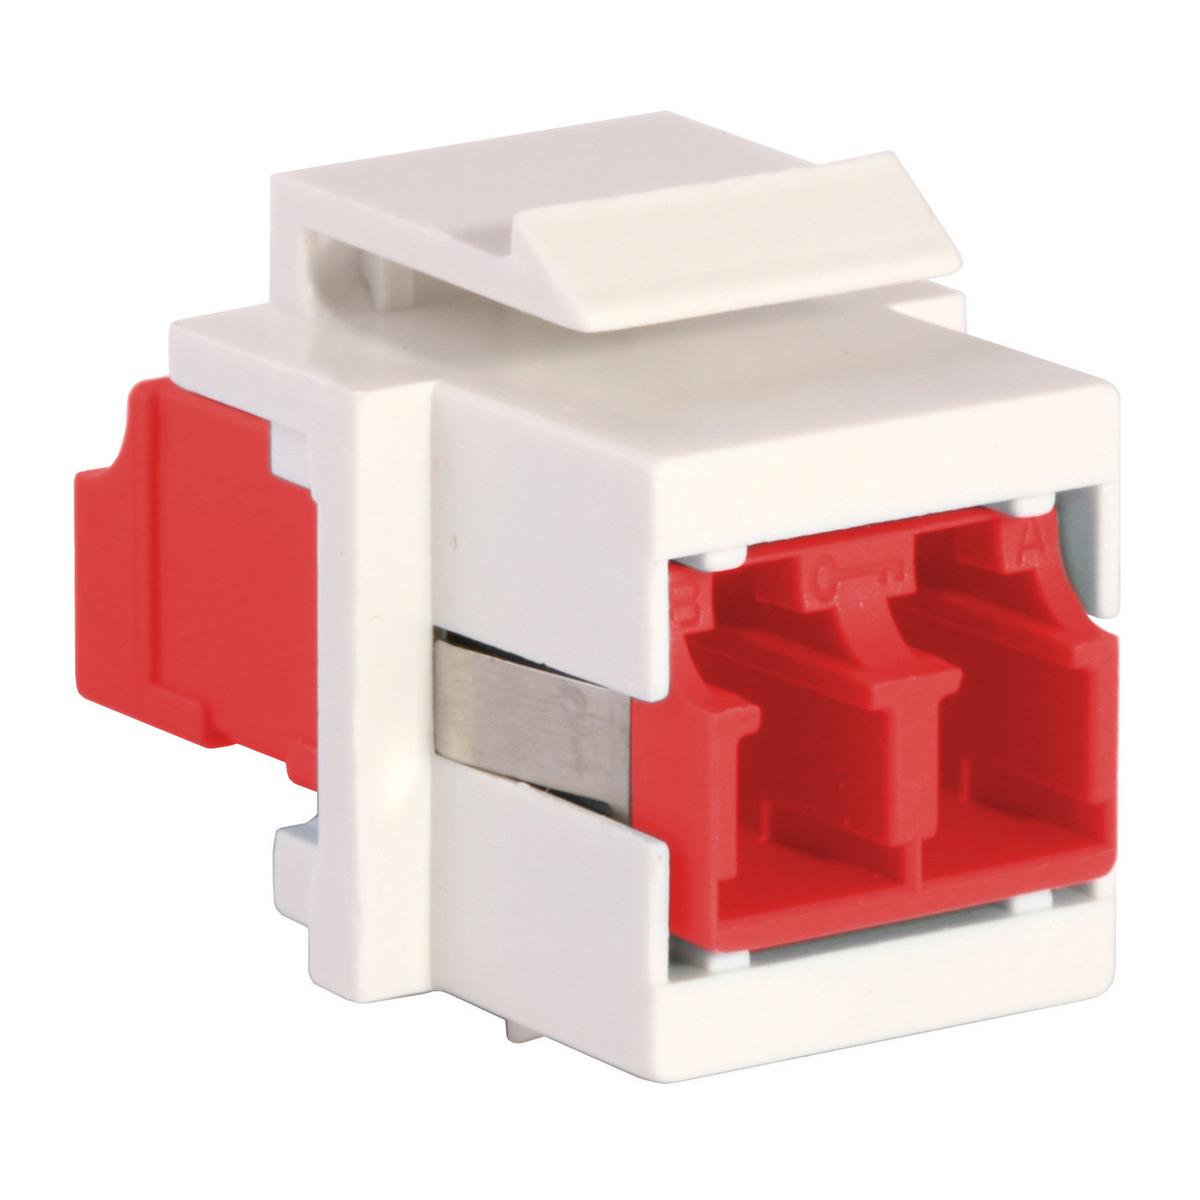 Hubbell SFFLCSROW Fiber Optic Connectors, Snap-Fit, Flush, LC-Duplex, Zircon Sleeves, Red, Office White Housing  ; Snap Fit ; Office White Housing ; Flush ; LC Duplex ; Red Adapter ; Standard Product